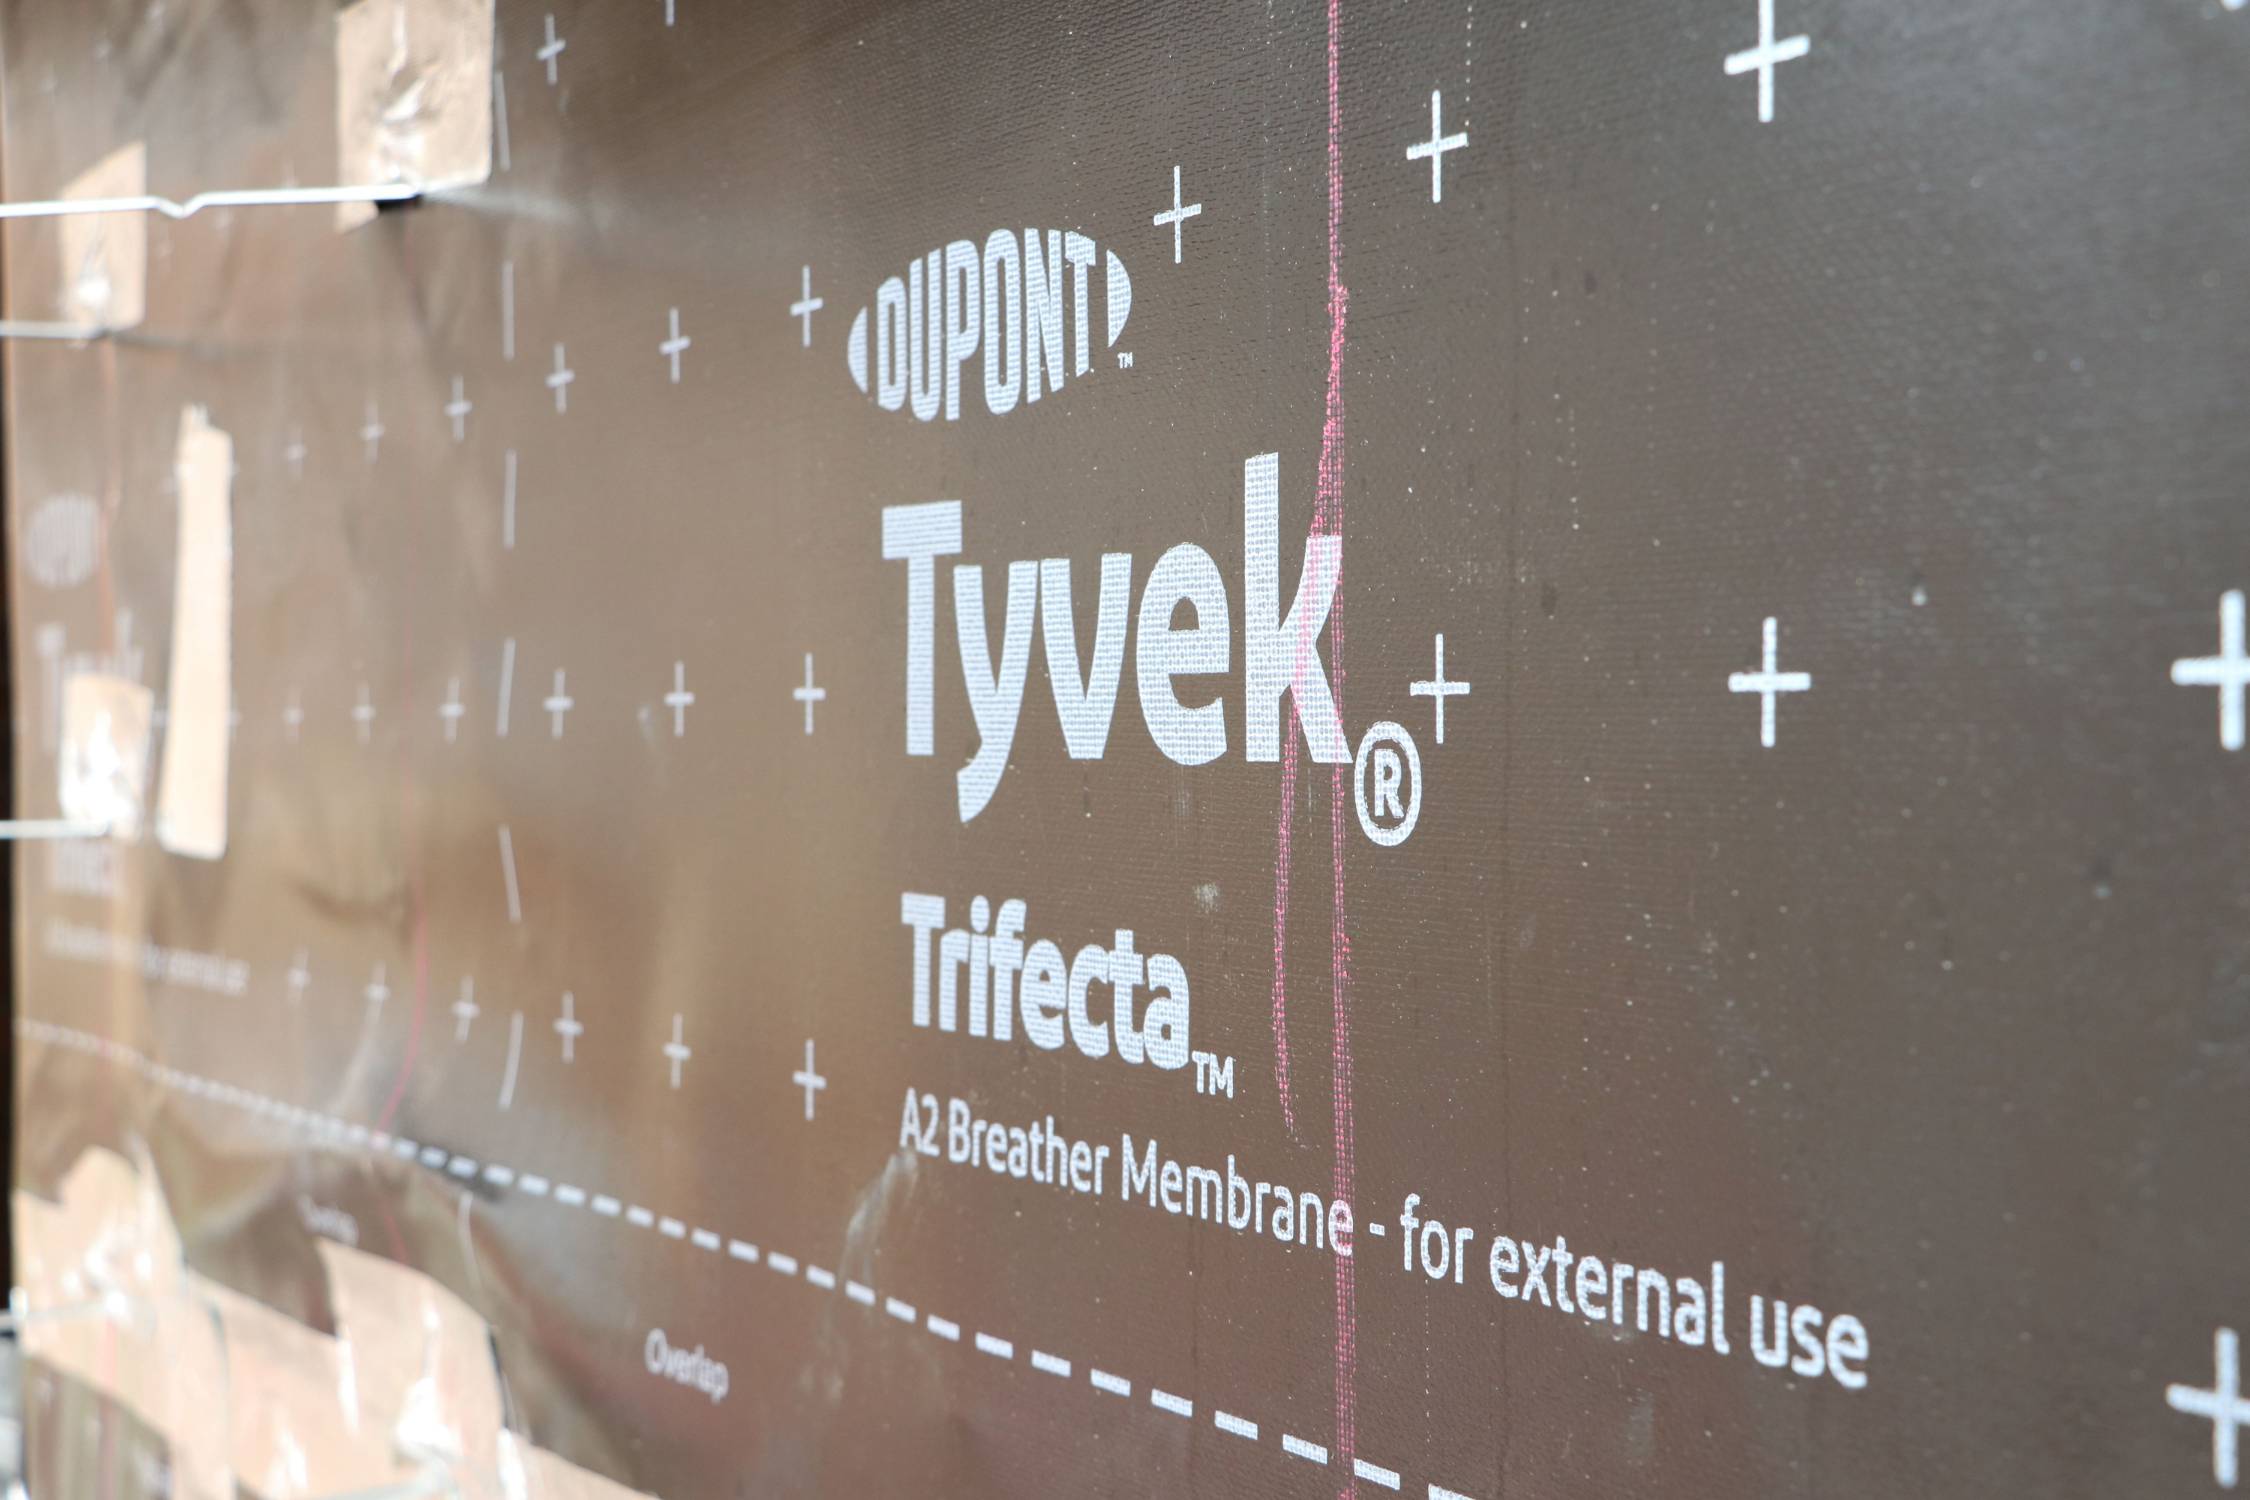 DuPont™ Tyvek® Trifecta™ - A2-Fire Rated Breather Membrane